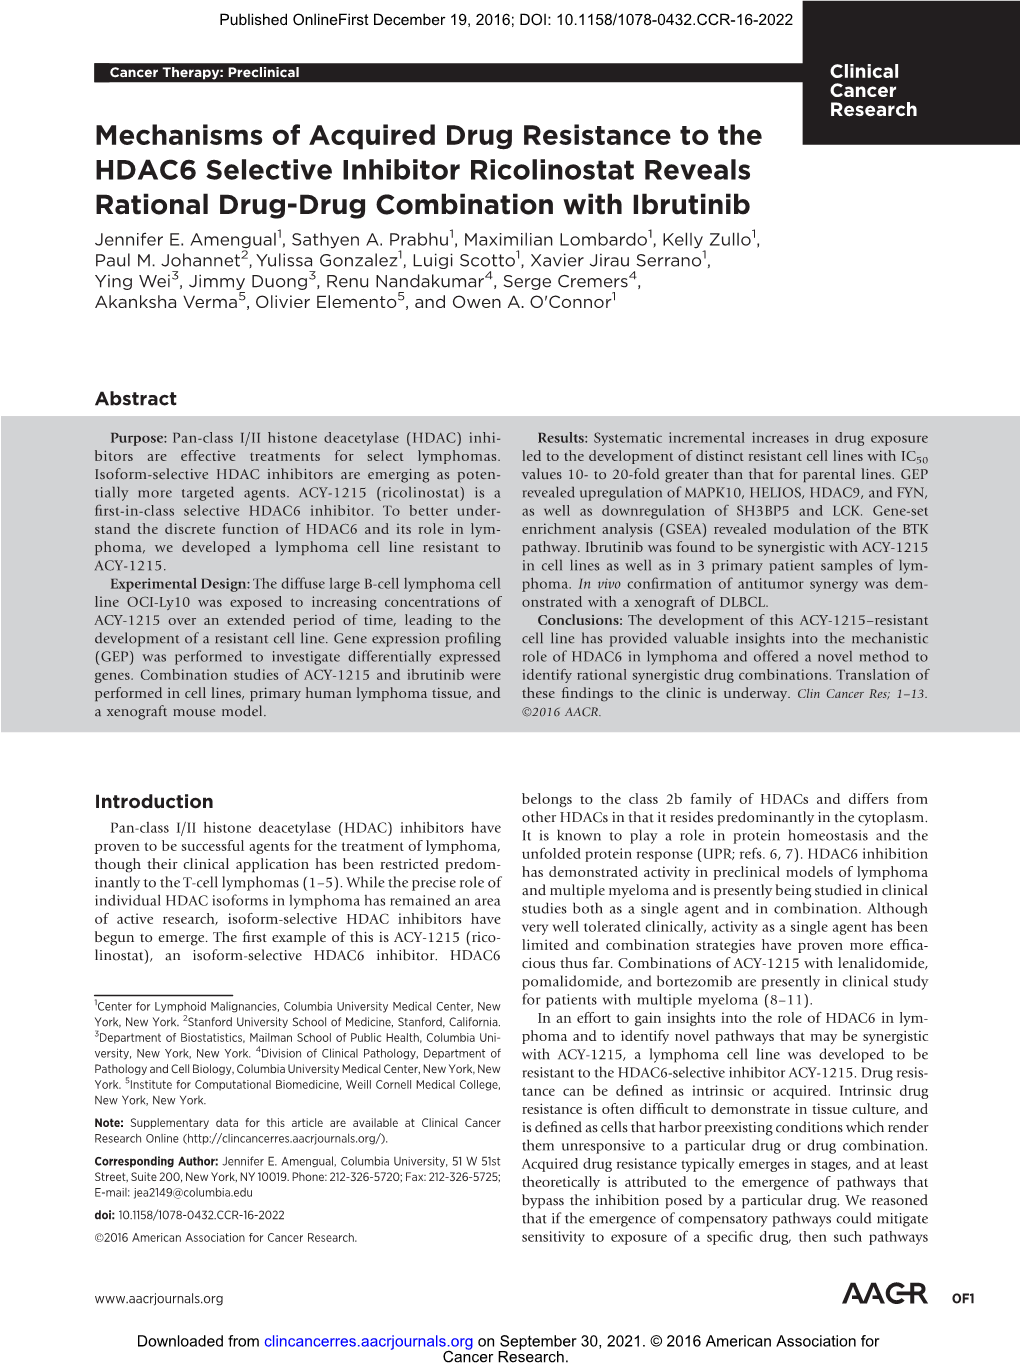 Mechanisms of Acquired Drug Resistance to the HDAC6 Selective Inhibitor Ricolinostat Reveals Rational Drug-Drug Combination with Ibrutinib Jennifer E